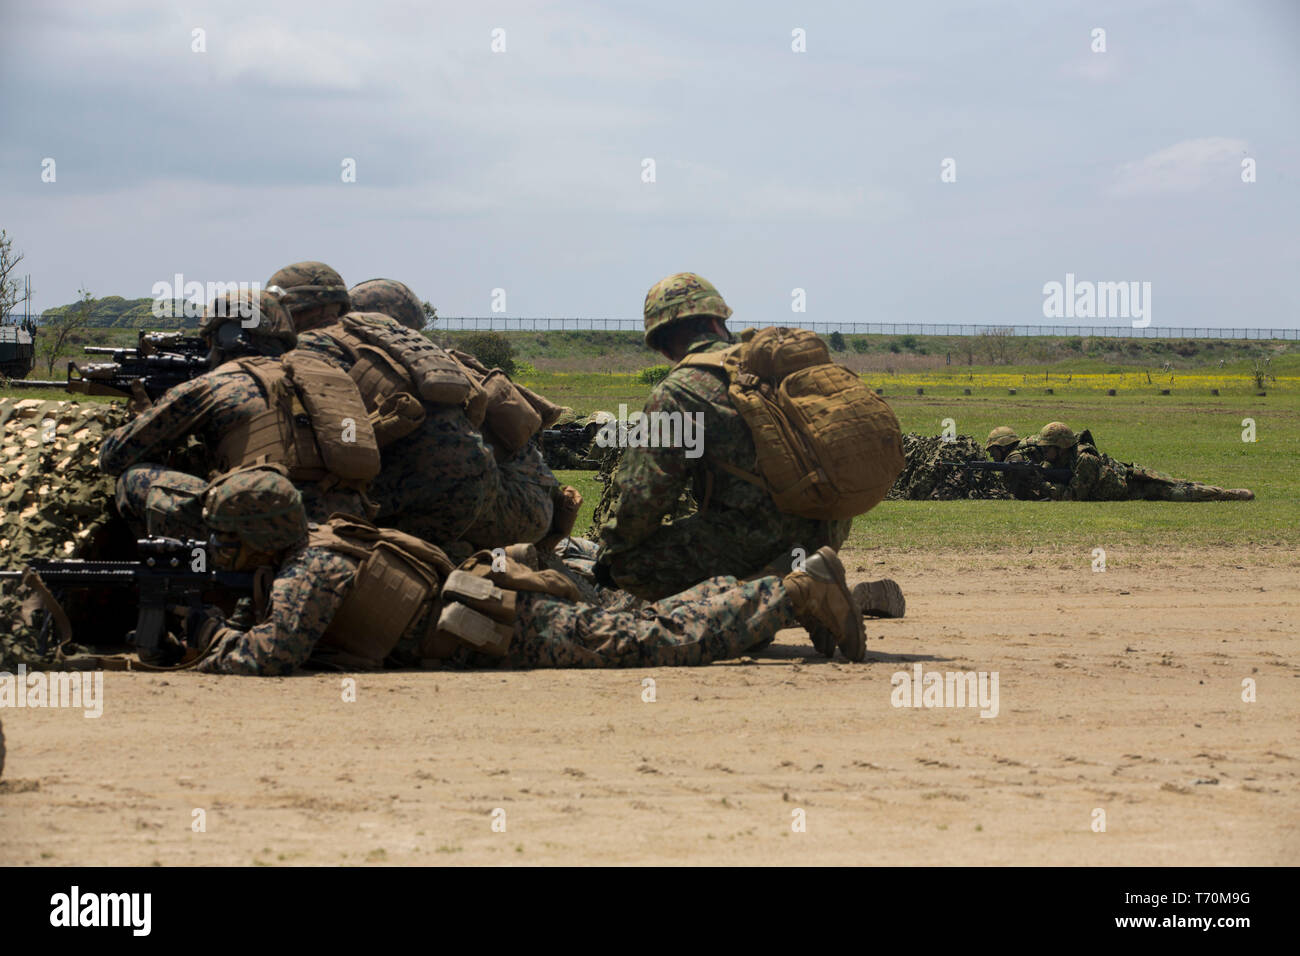 Soldiers of the Japan Ground Self-Defense Force’s Amphibious Rapid Deployment Brigade and U.S. Marines from Bravo Company, Battalion Landing Team, 1st Battalion, 4th Marines, conduct an assault demonstration during subject matter expert exchanges at Camp Ainoura, Sasebo, Japan, April 26, 2019. BLT 1/4 is the Ground Combat Element for the 31st Marine Expeditionary Unit. The weeklong SMEE reinforced the U.S. Marine-JGSDF partnership and commemorated the 1st anniversary of the ARDB. The 31st MEU, the Marine Corps’ only continually forward-deployed MEU, provides a flexible and lethal force ready t Stock Photo